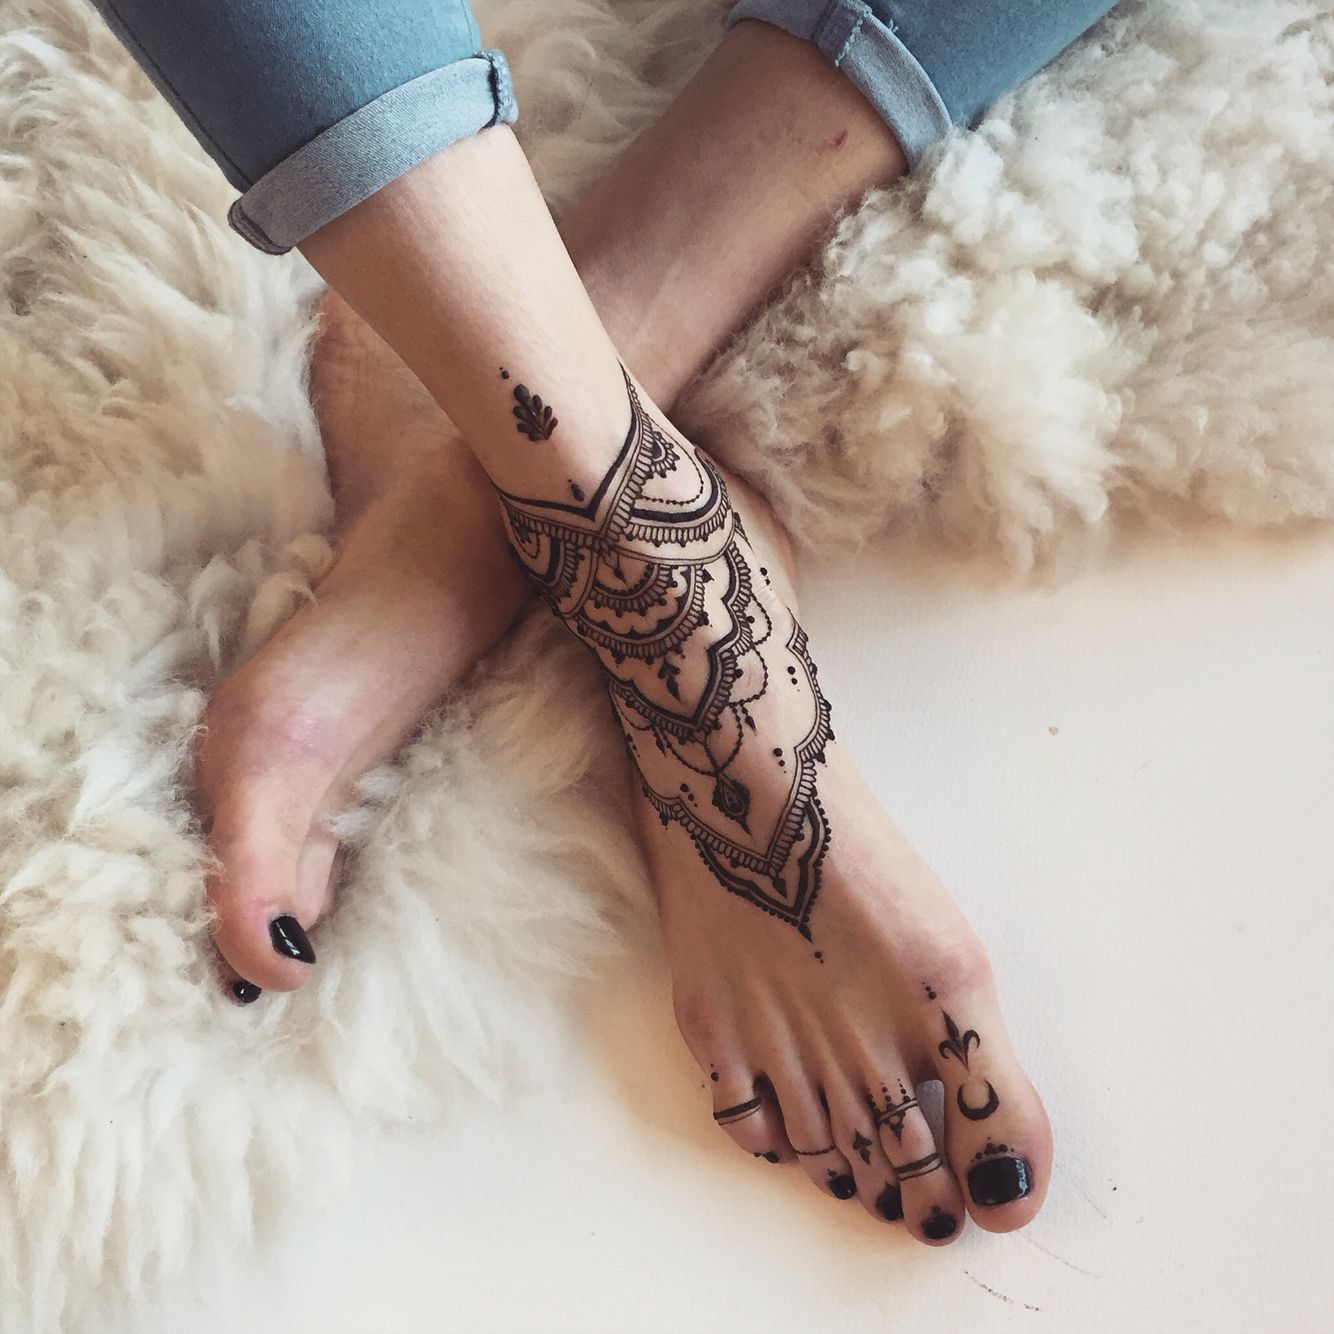 sheepskin rug in creamy white, under a pair of feet, one of them decorated with an intricate, black henna tattoo, black nail polish 